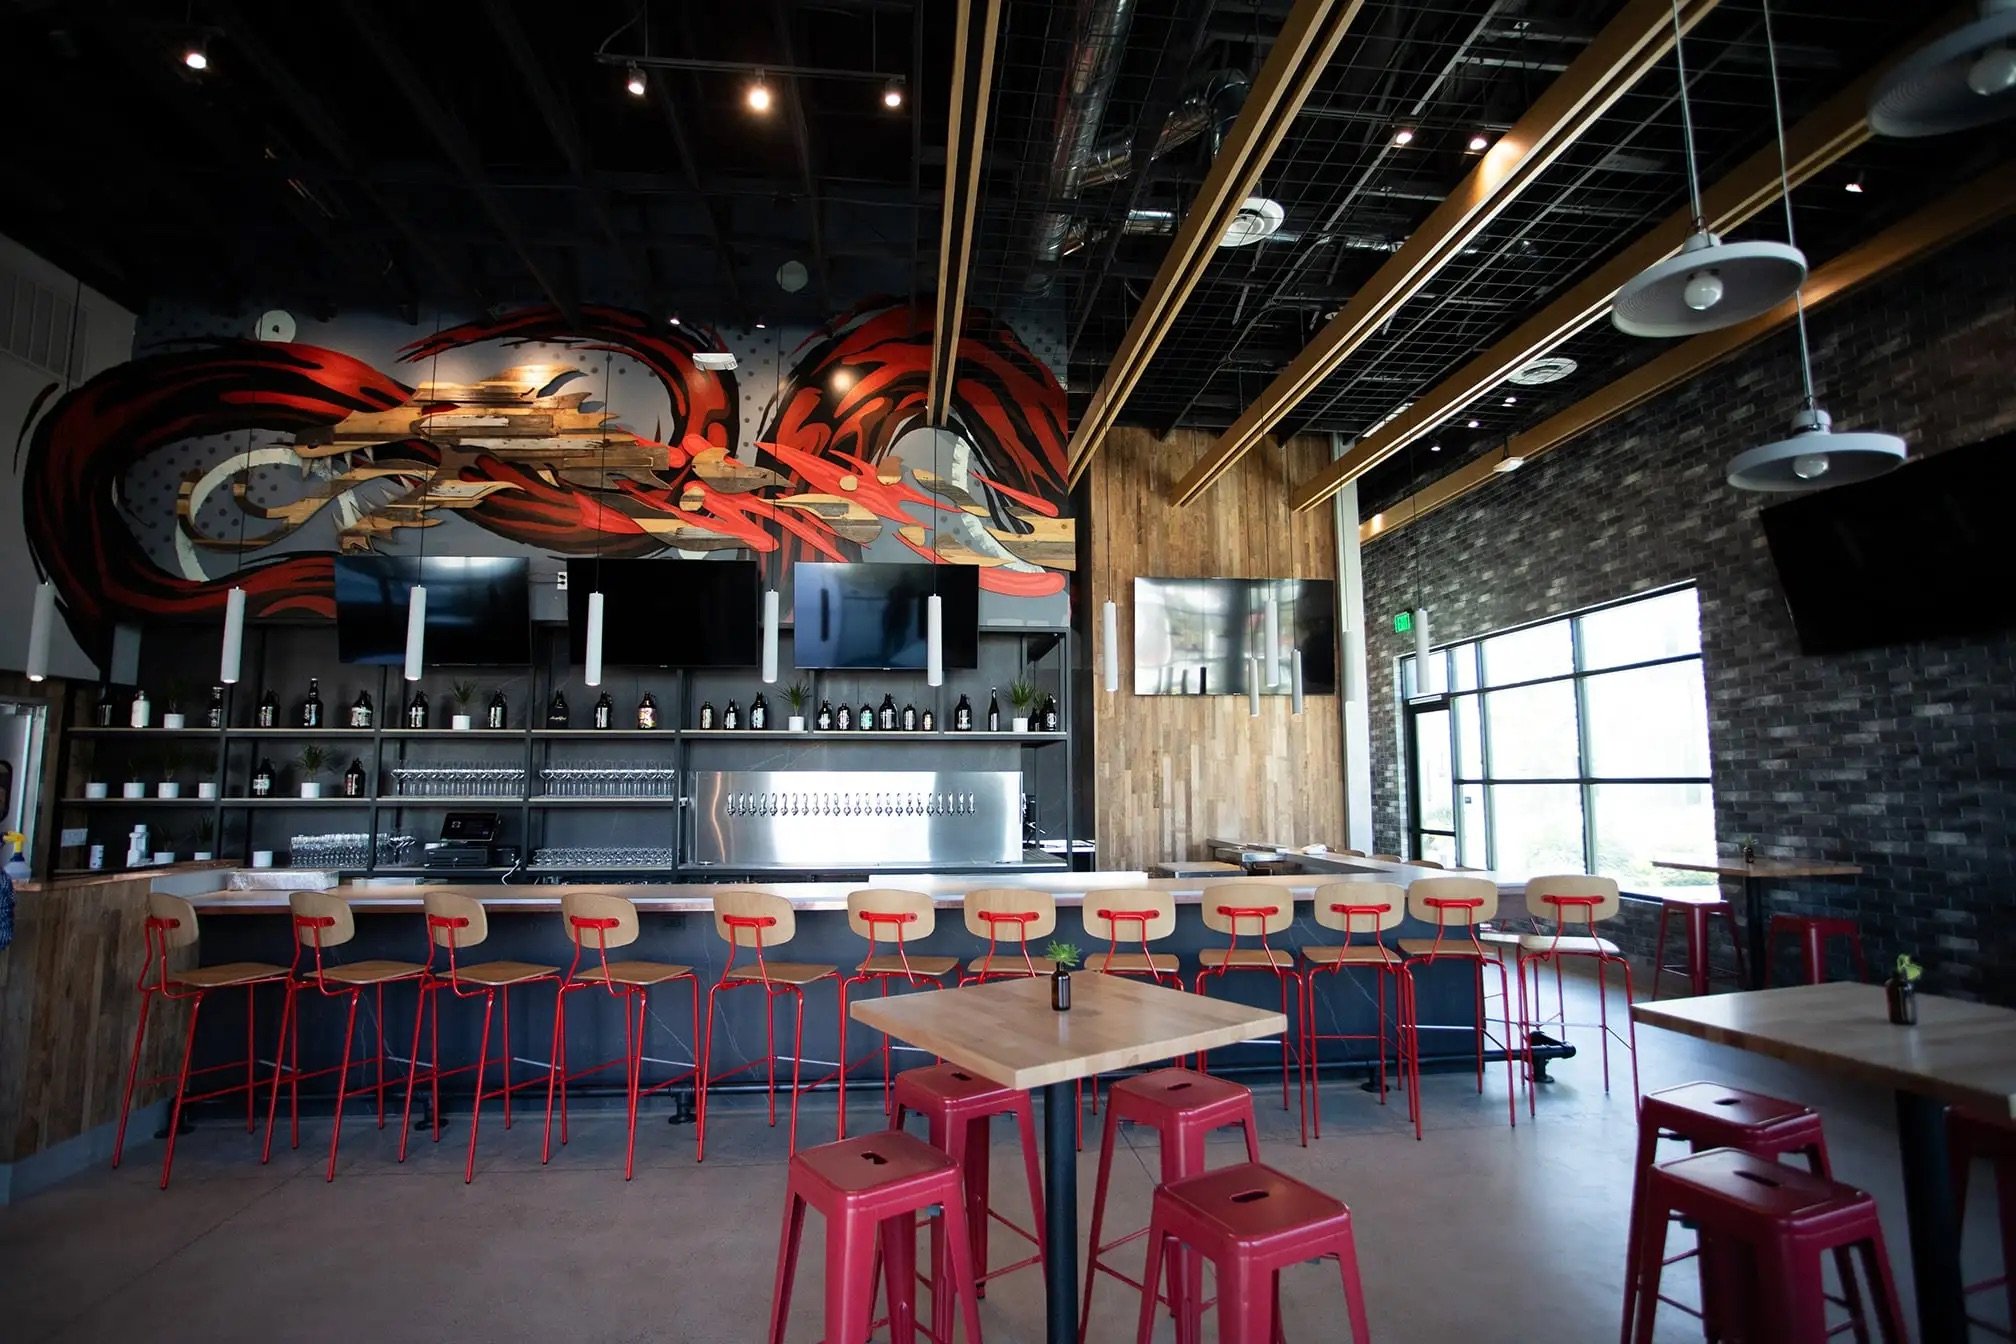 Common Theory's new Otay Lakes bar and restaurant location. The group is planning on opening Sura BBQ in Chula Vista, San Diego